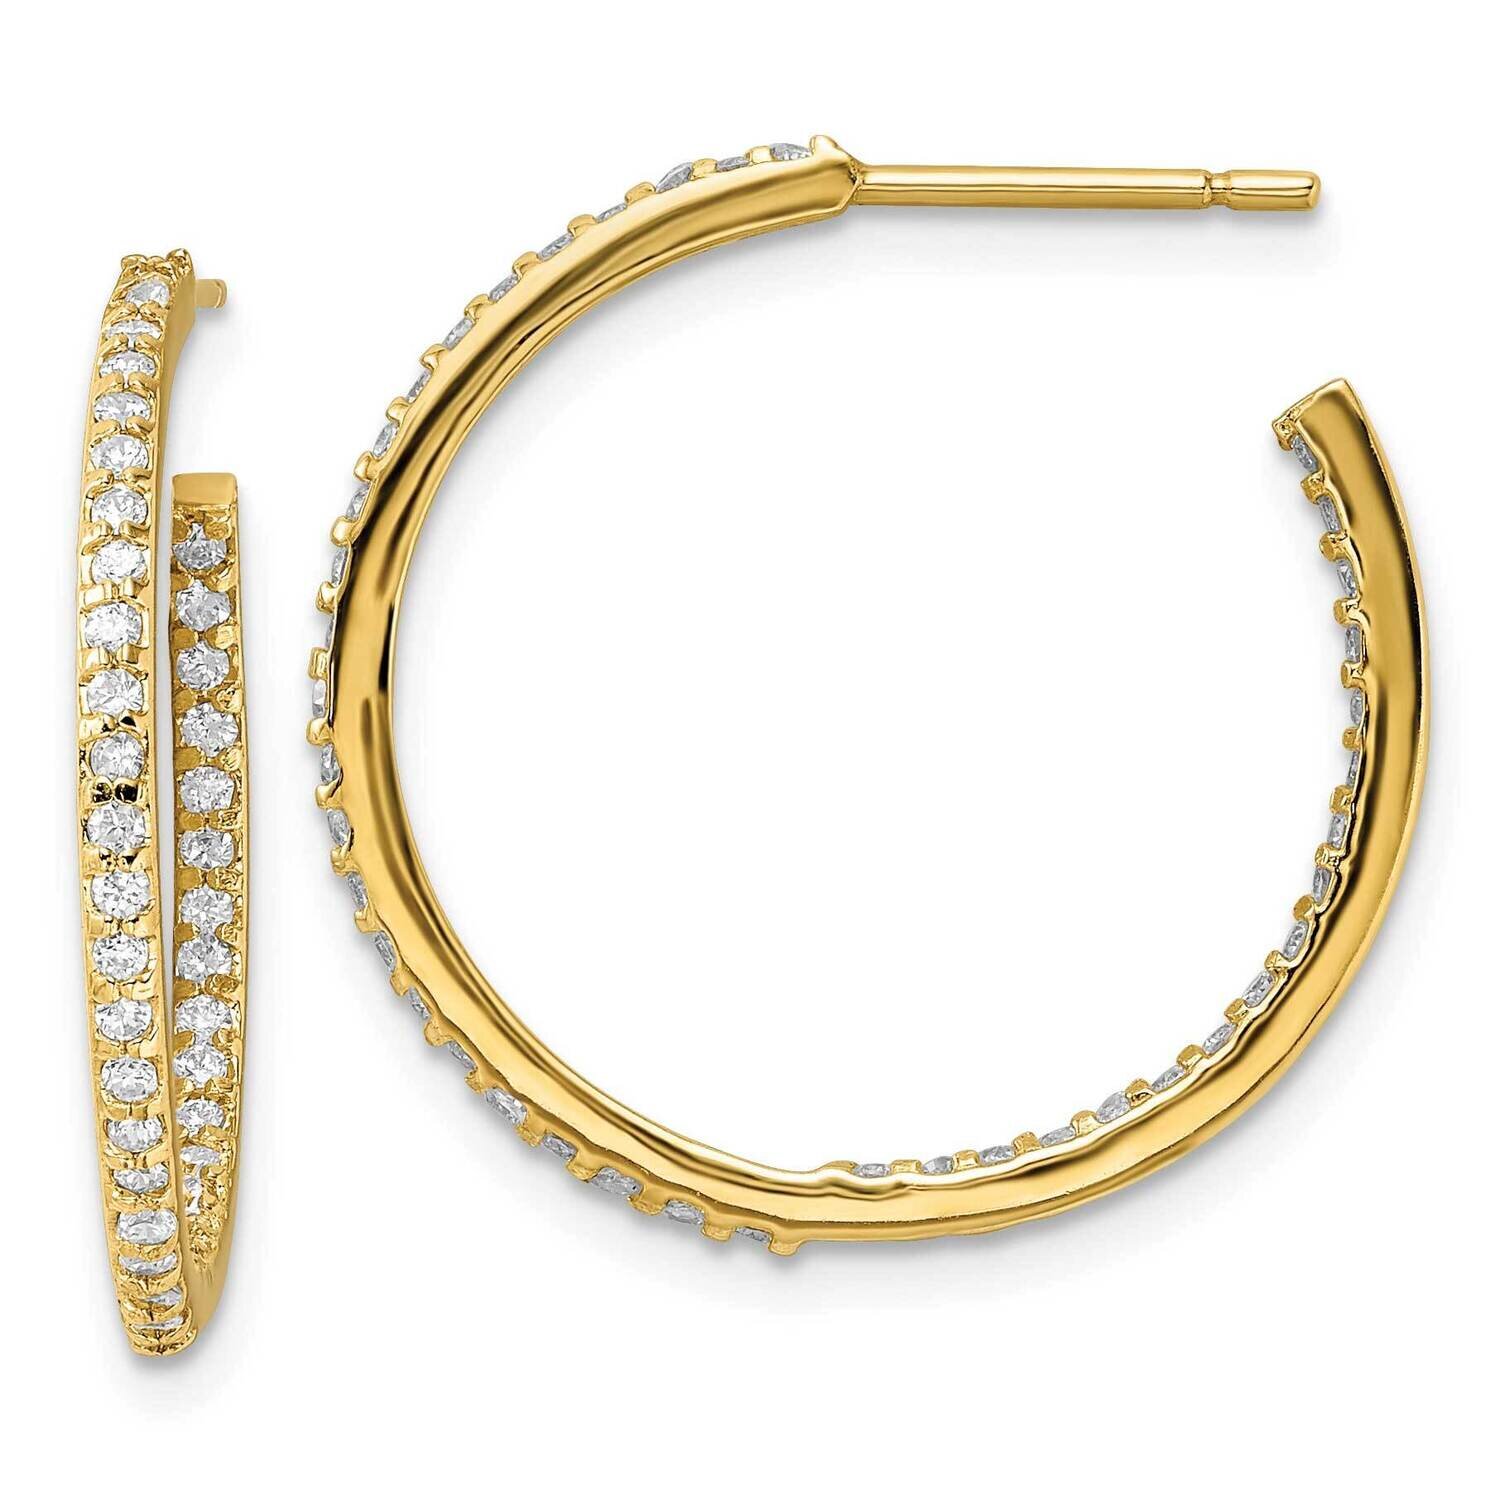 Cheryl M CZ Diamond Pave Hoop Earrings Gold-plated Sterling Silver QCM1465